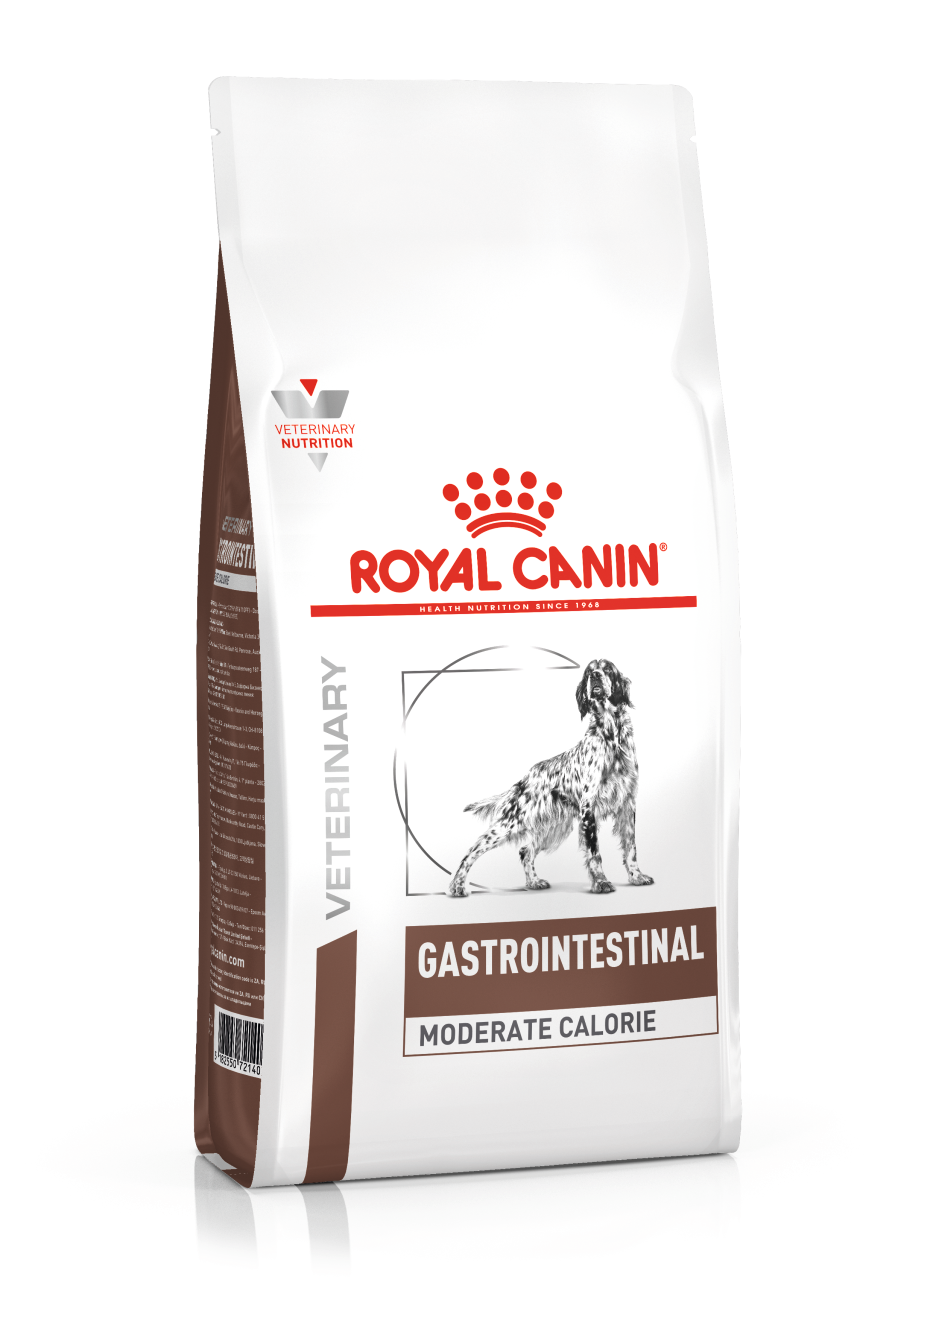 Royal Canin Gastrointestinal Moderate Calorie hond <br>1x 15 kg